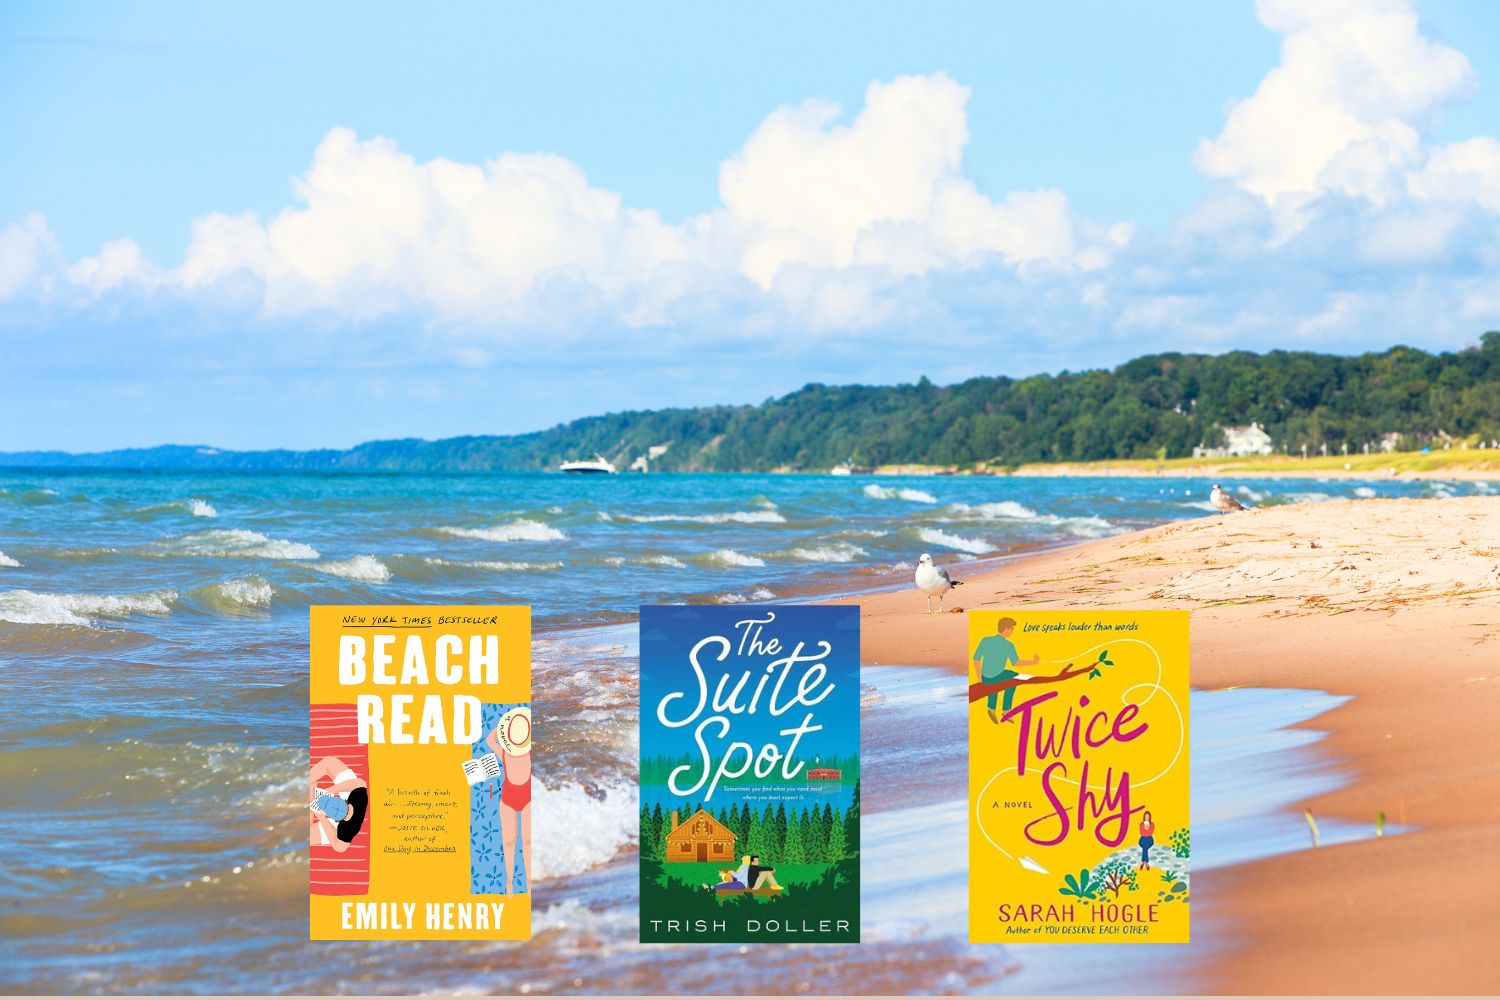 Three book covers in front of a beach scene